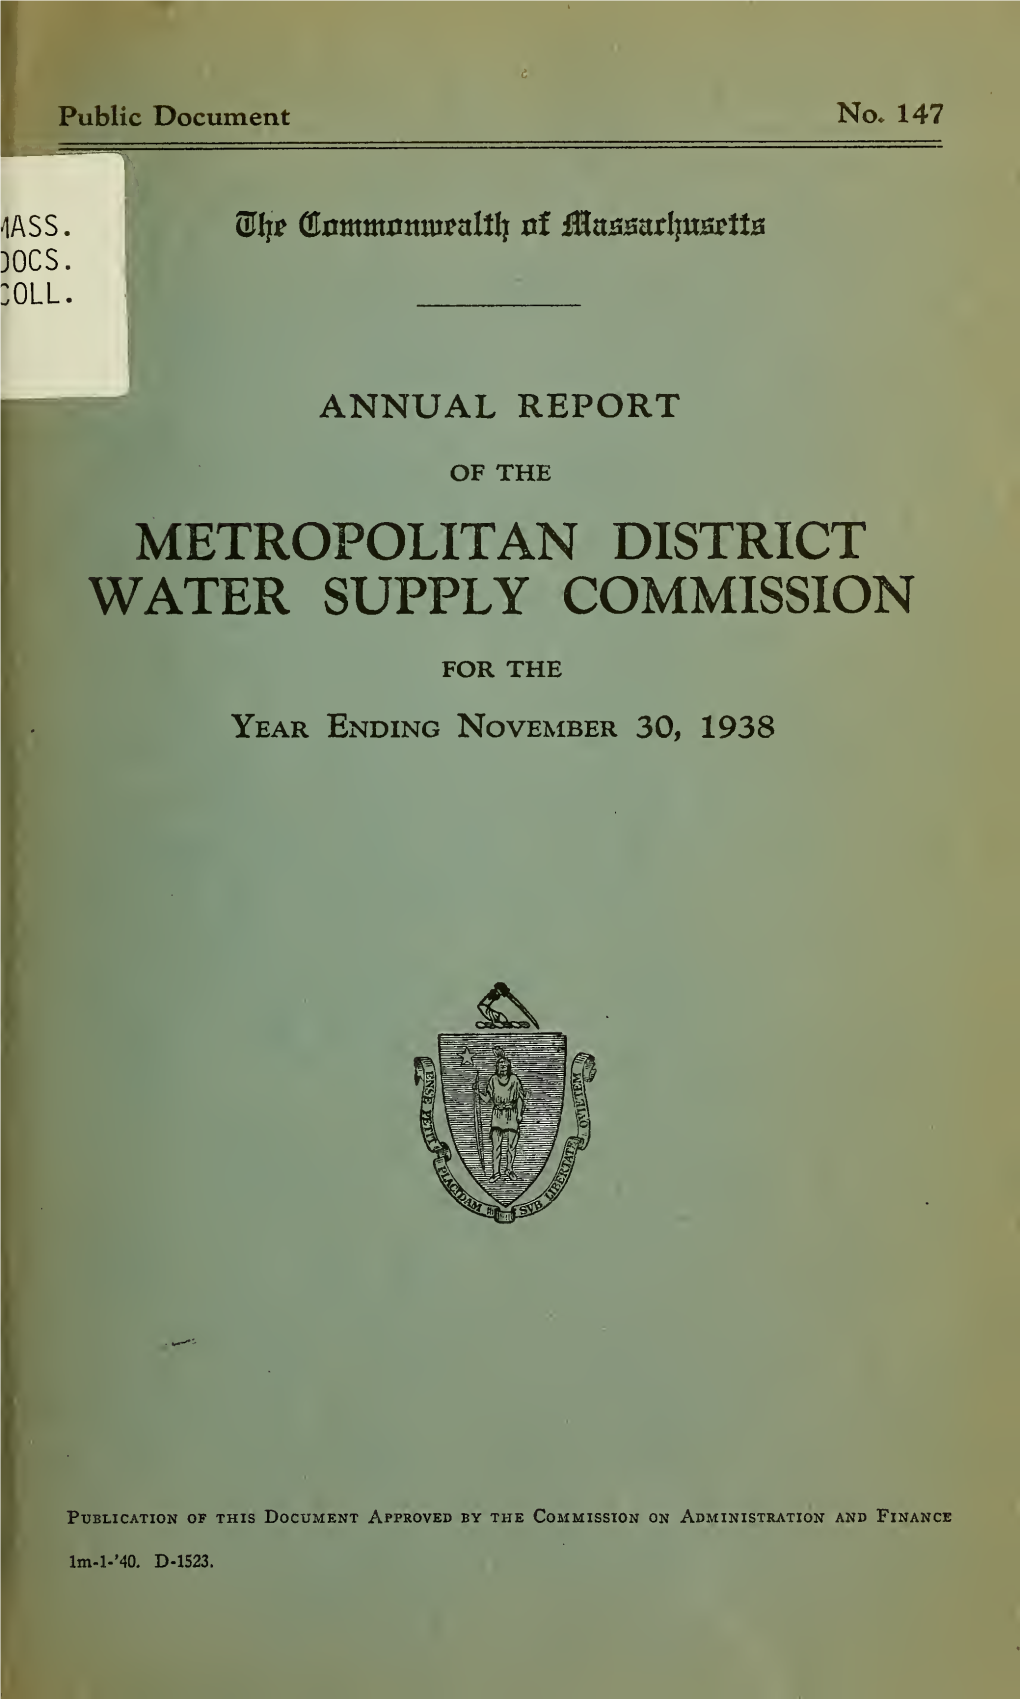 Annual Report of the Metropolitan District Water Supply Commission